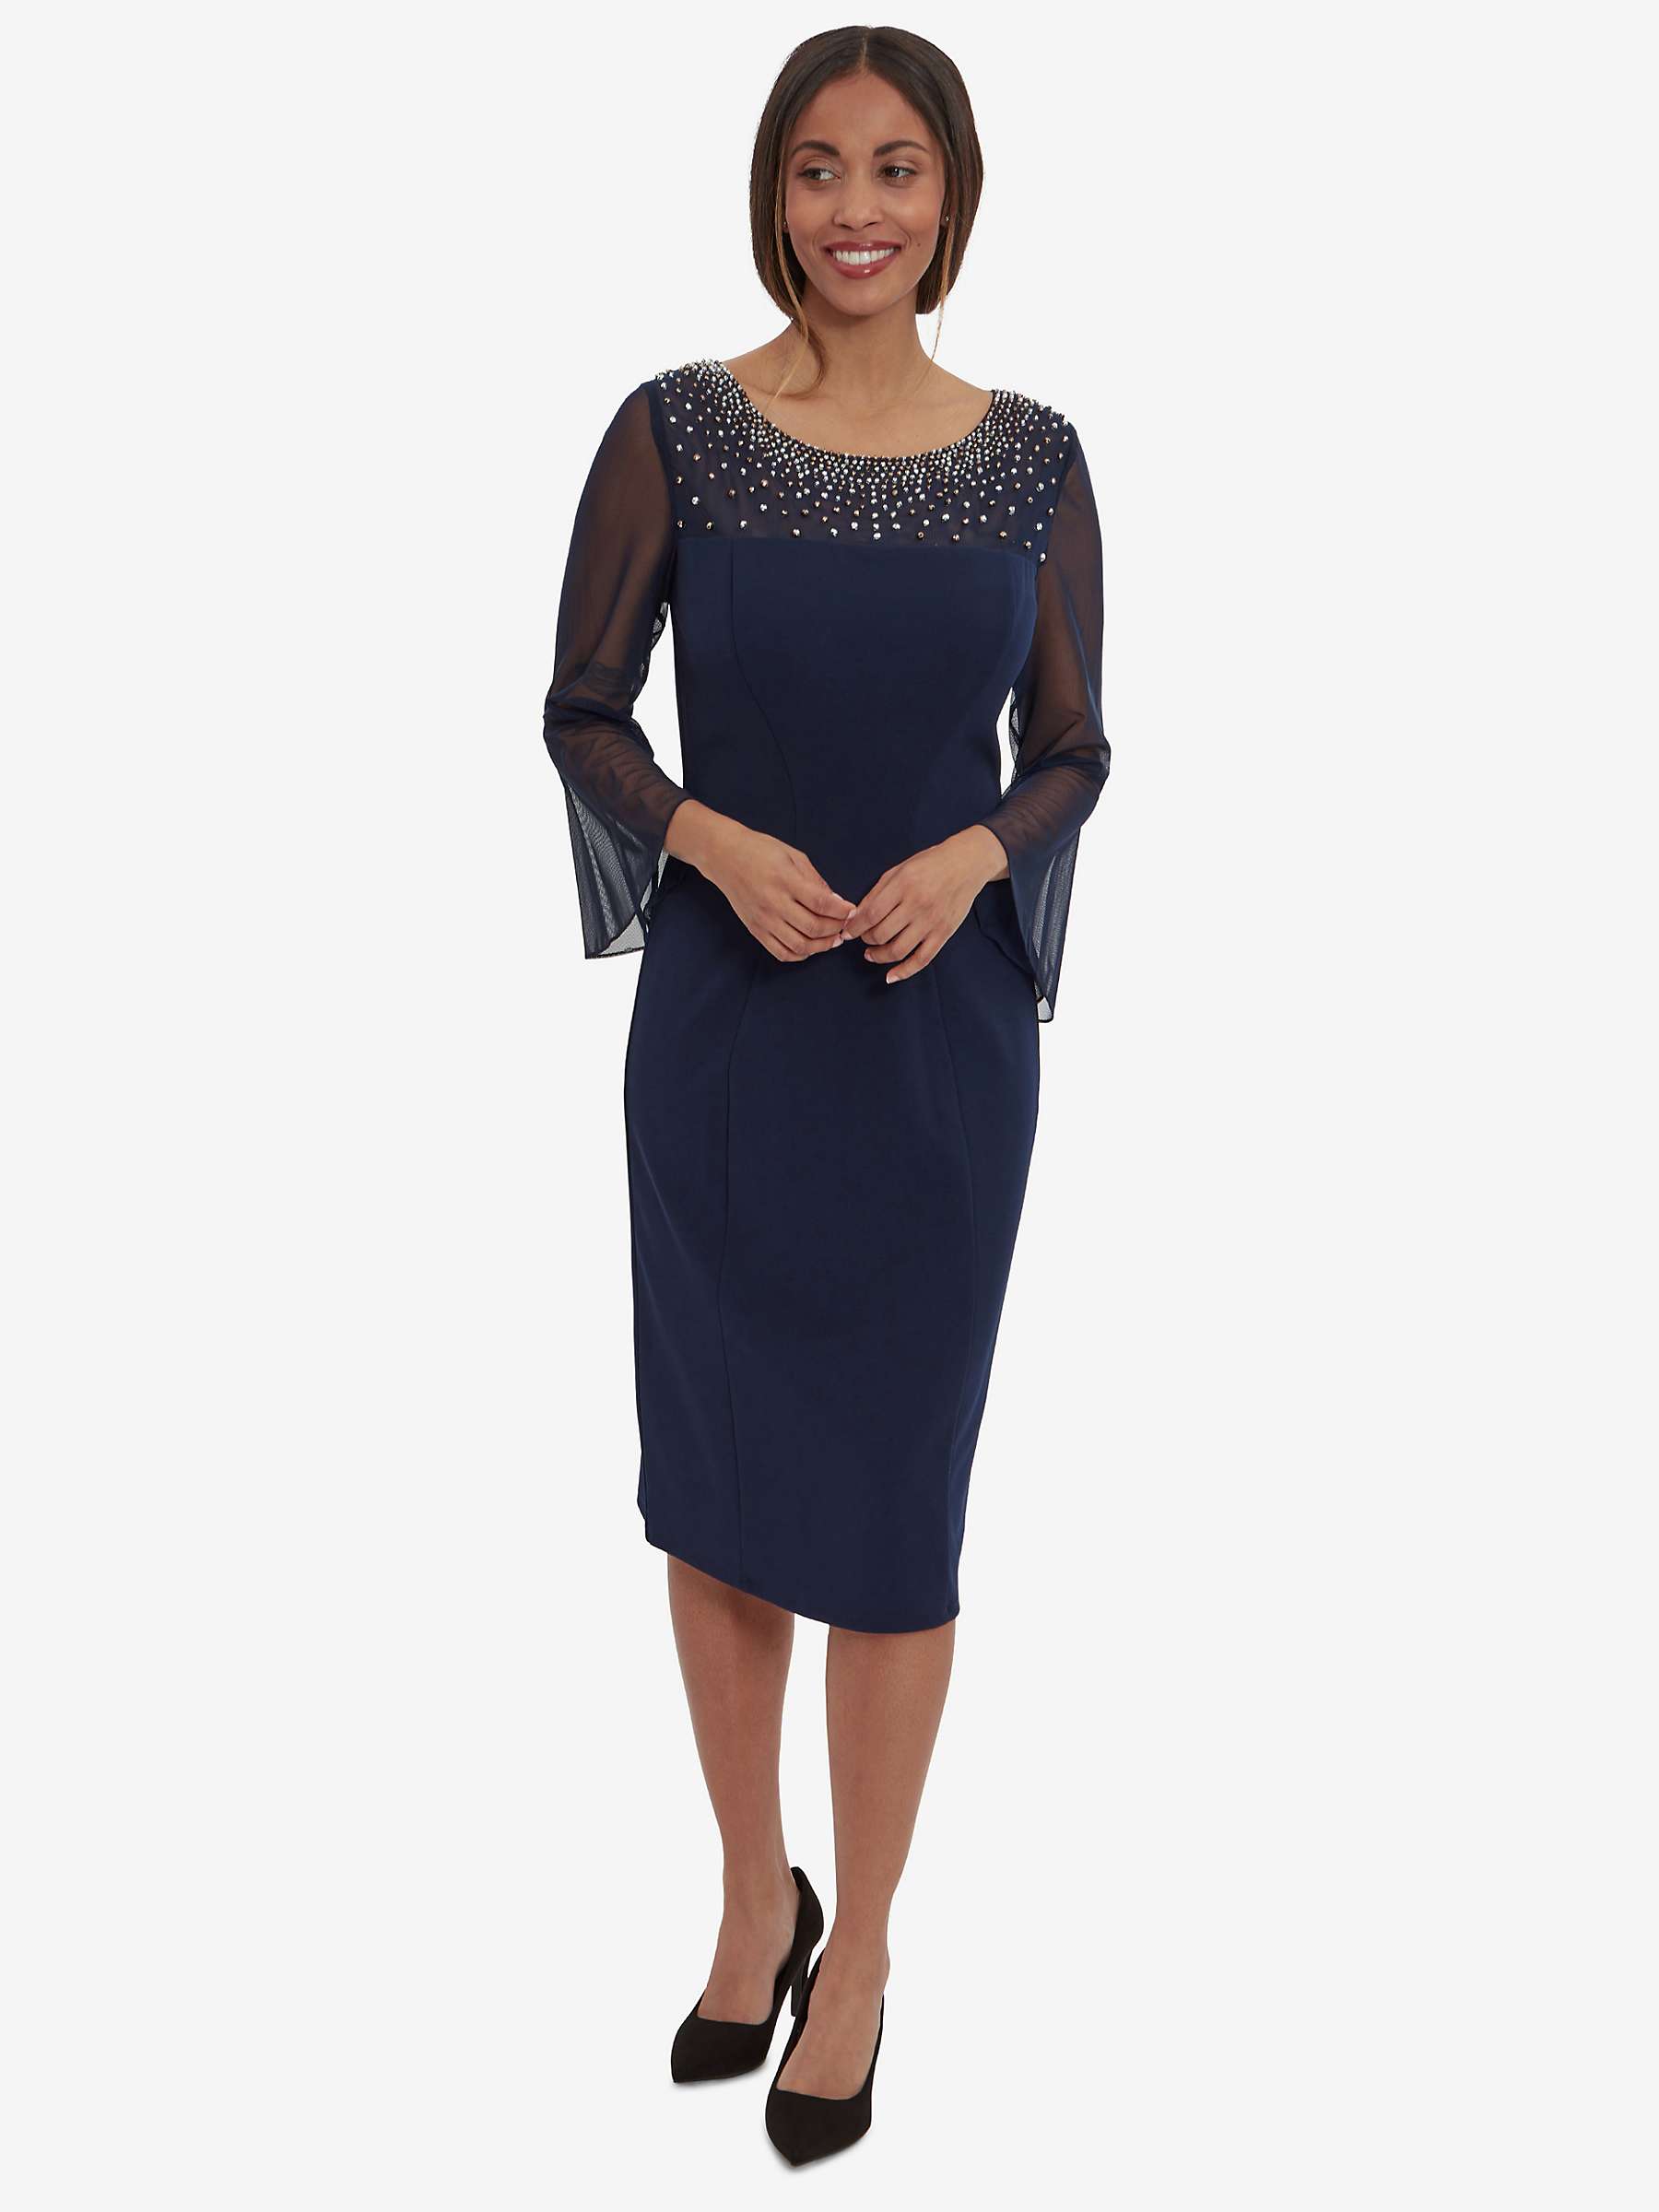 Buy Gina Bacconi Maurine Beaded Dress, Navy/Silver Online at johnlewis.com